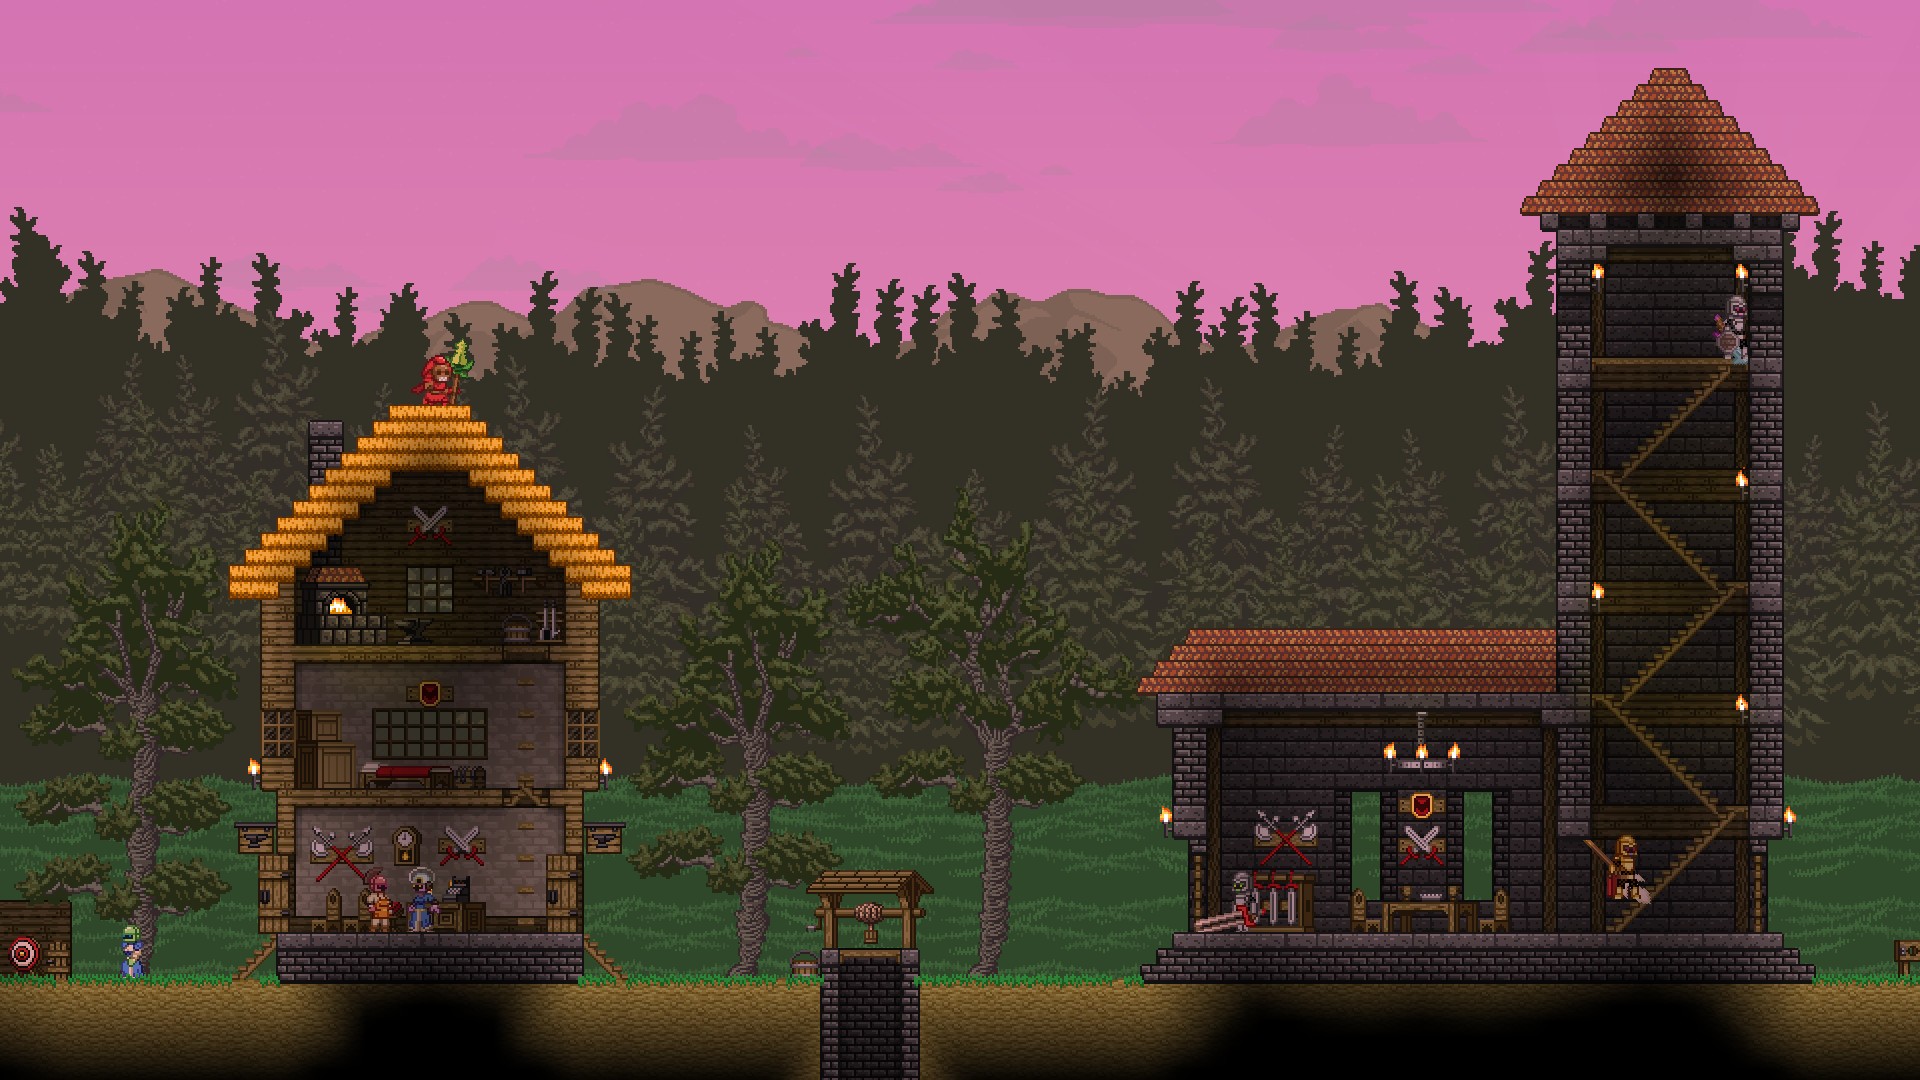 starbound save game